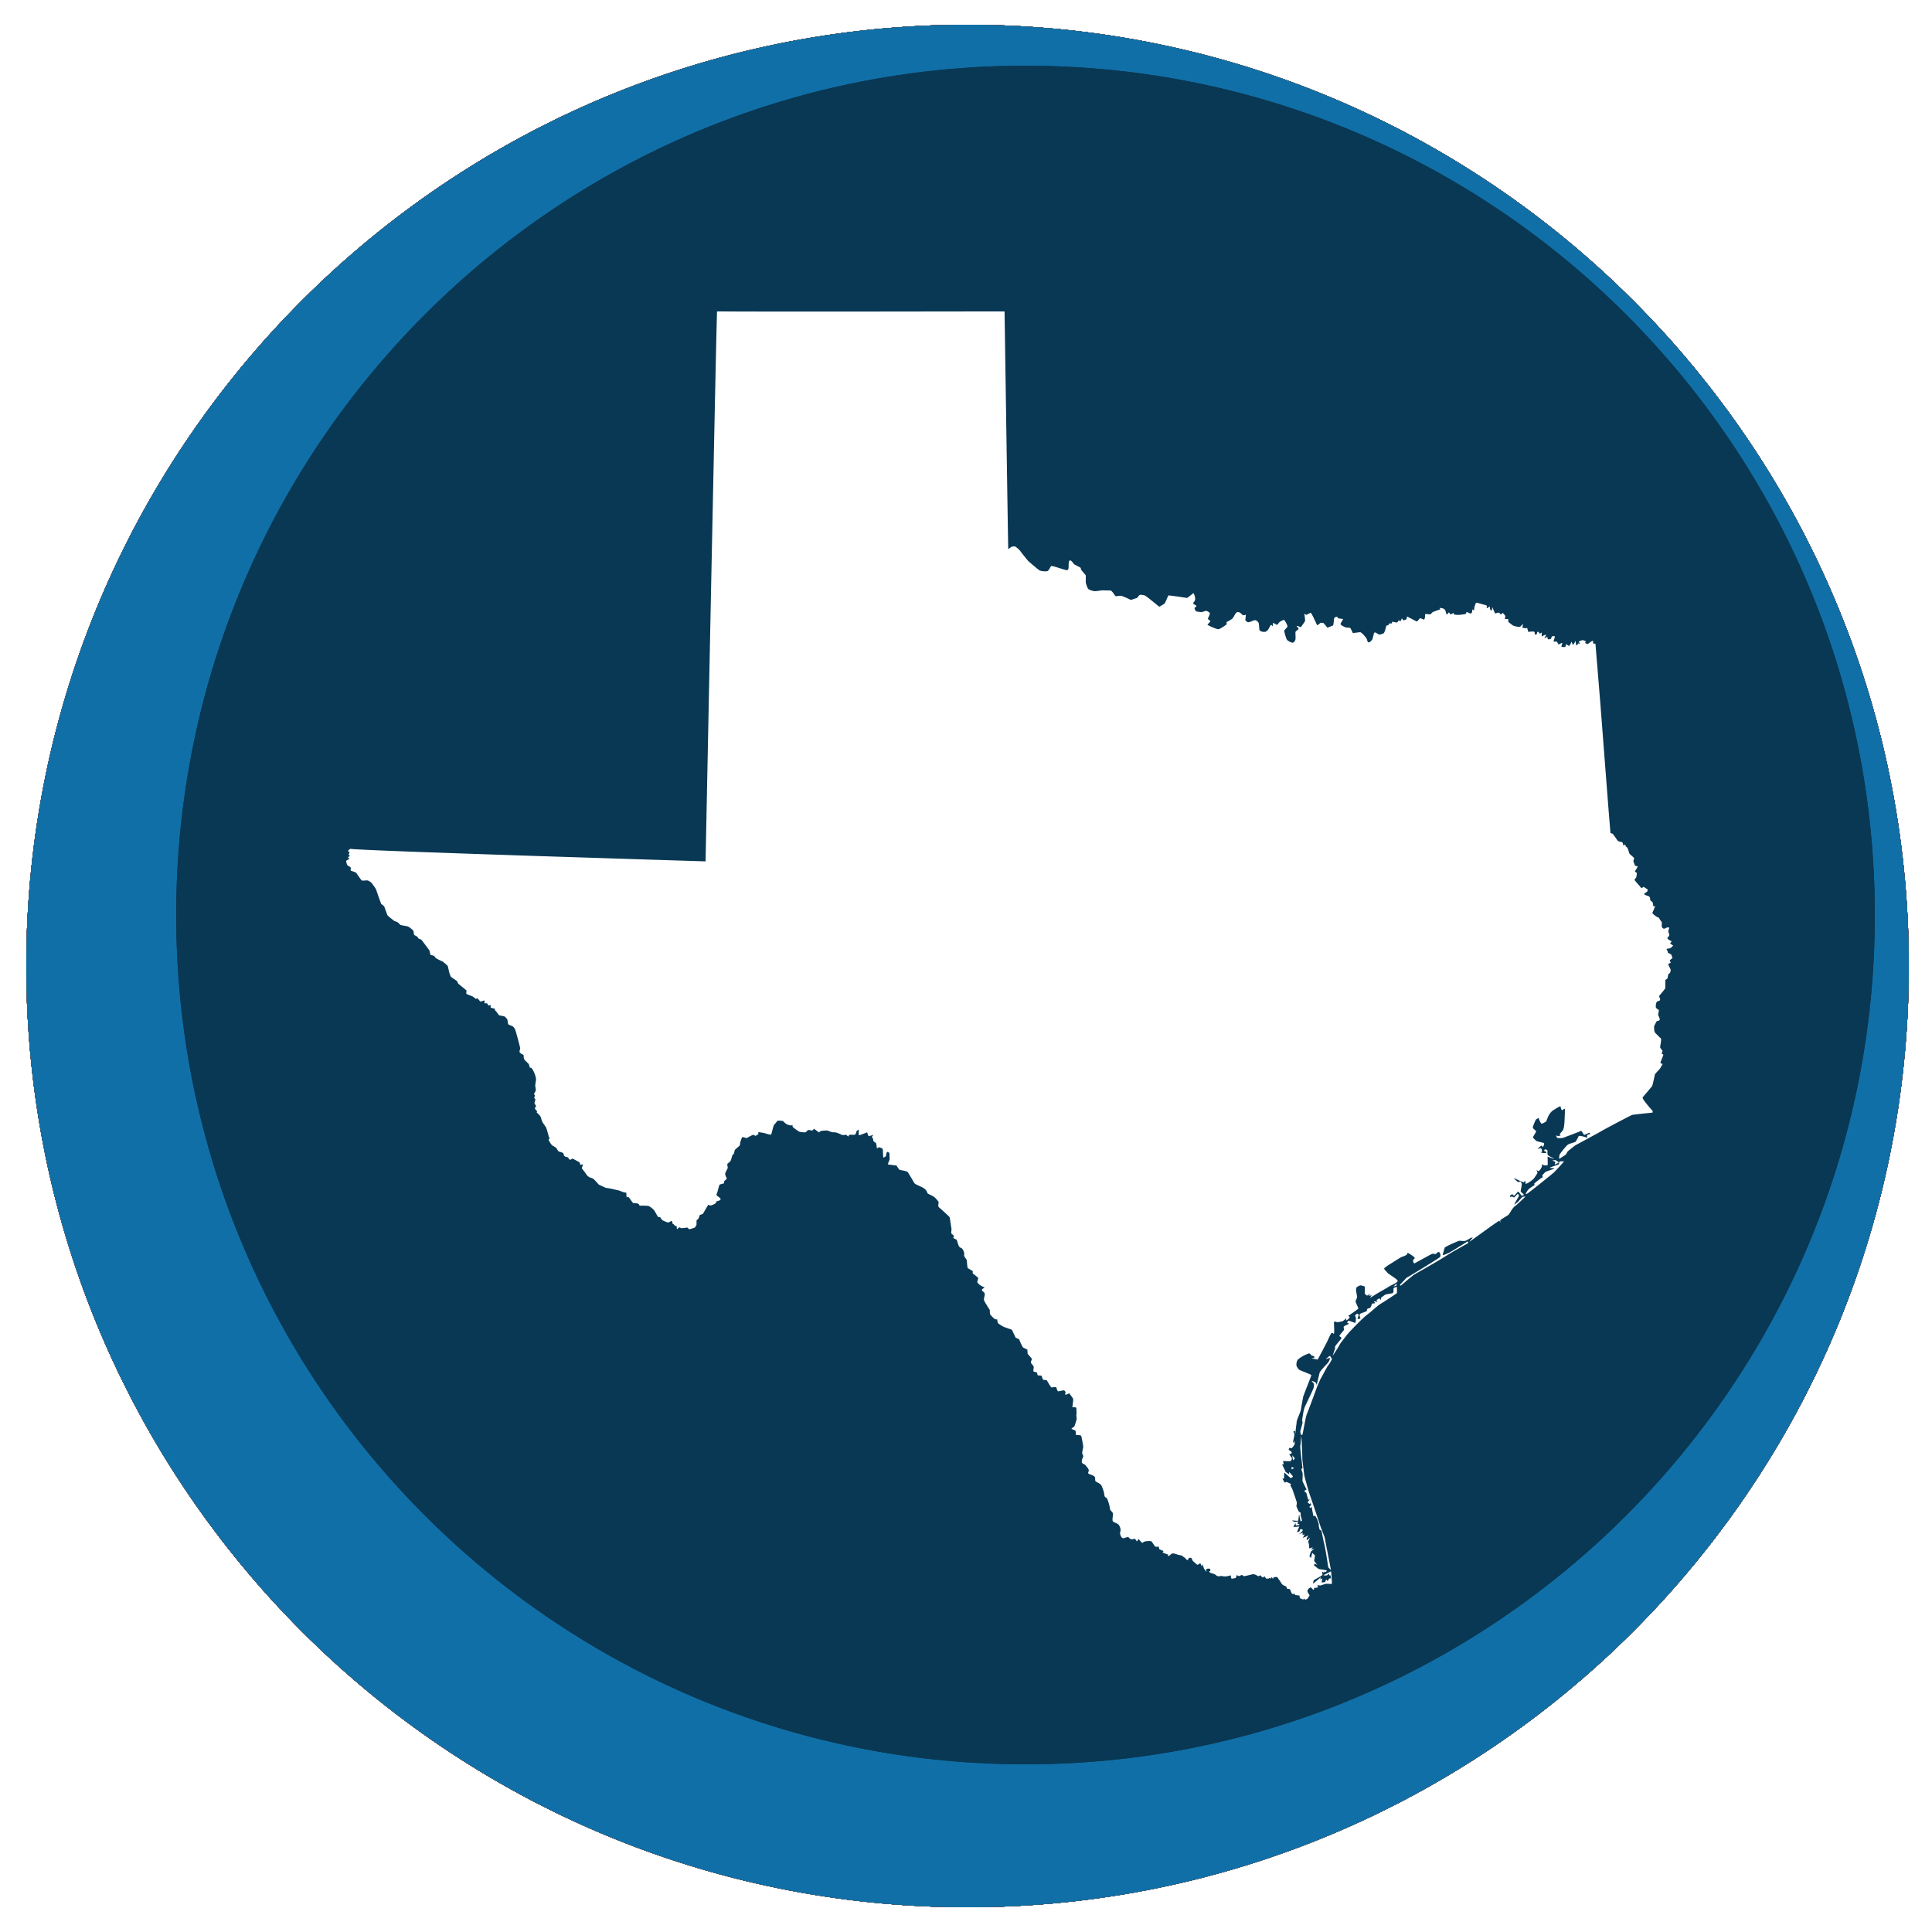 Texas state shape in a circle